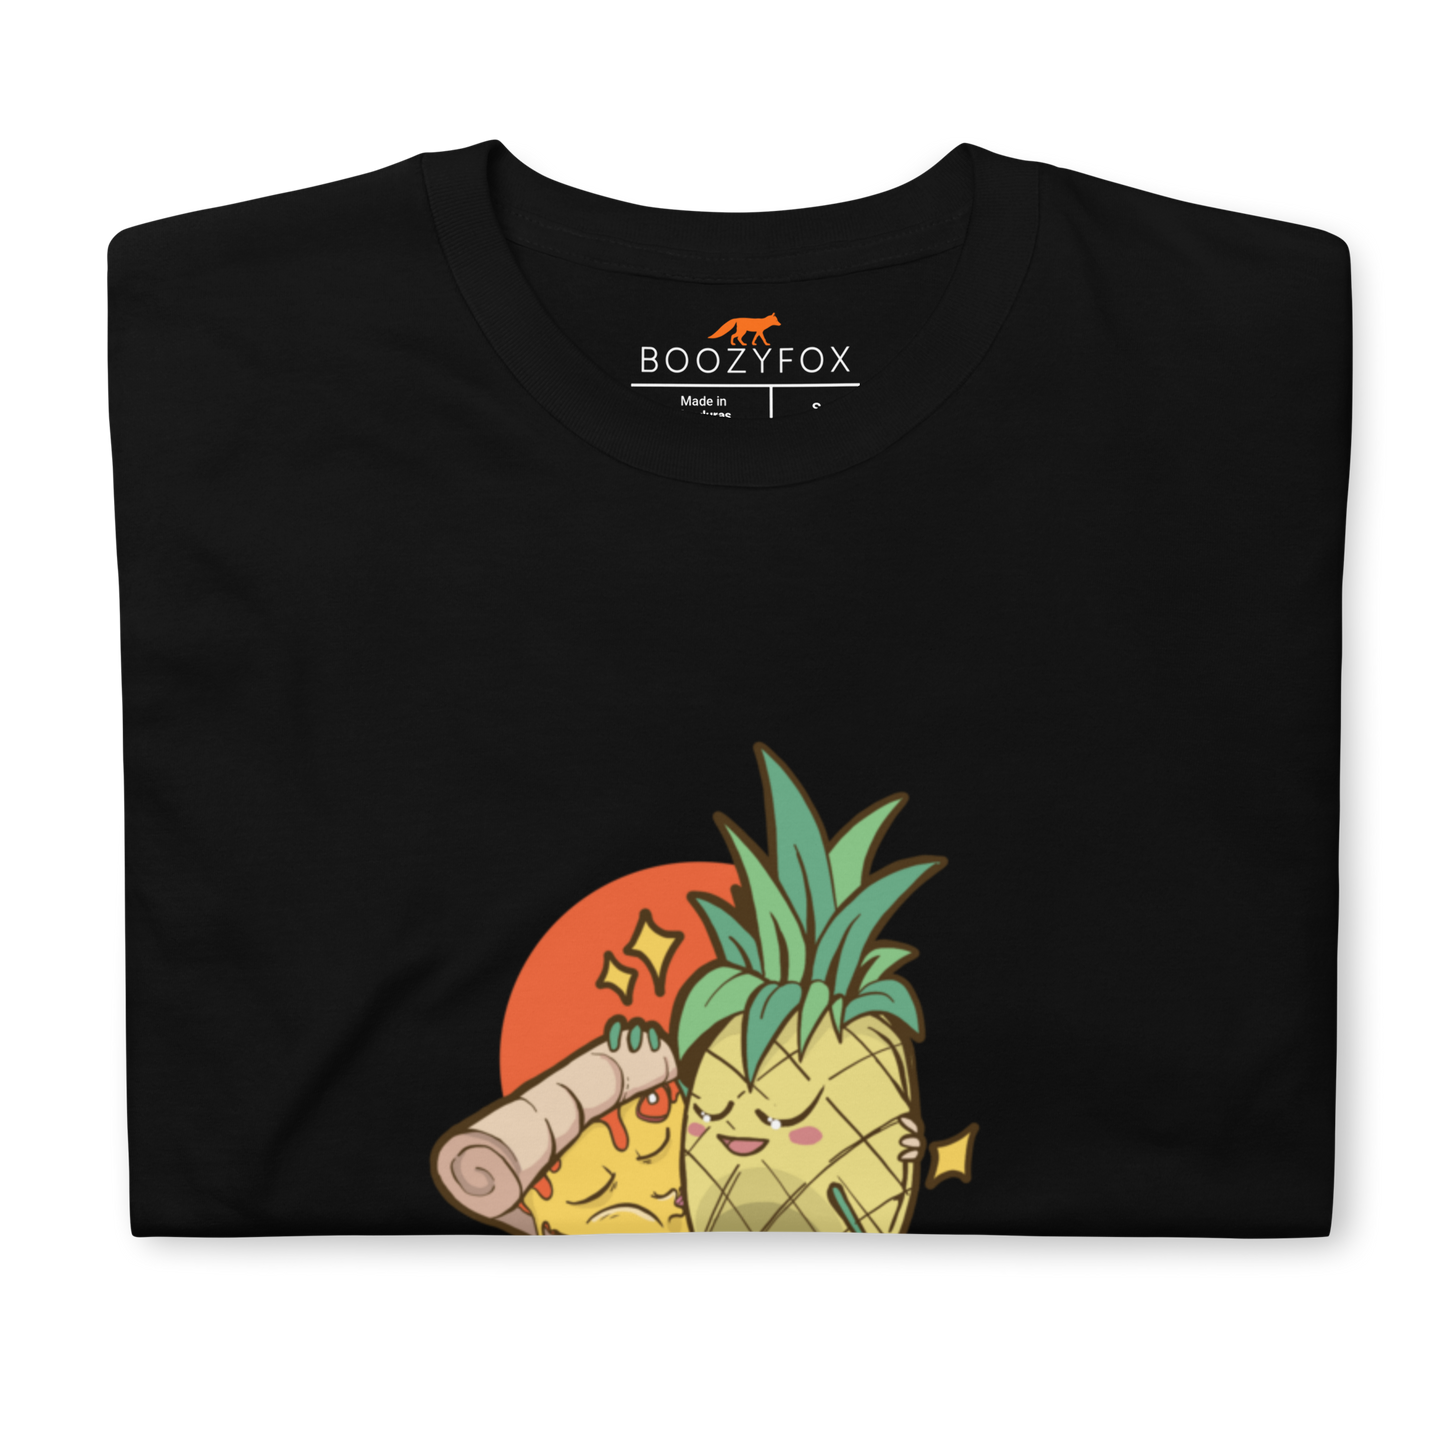 Front details of a Black Pineapple Pizza T-Shirt featuring the hilarious Pineapple & Pizza graphic on the chest - Funny Graphic Pineapple Pizza T-Shirts - Boozy Fox